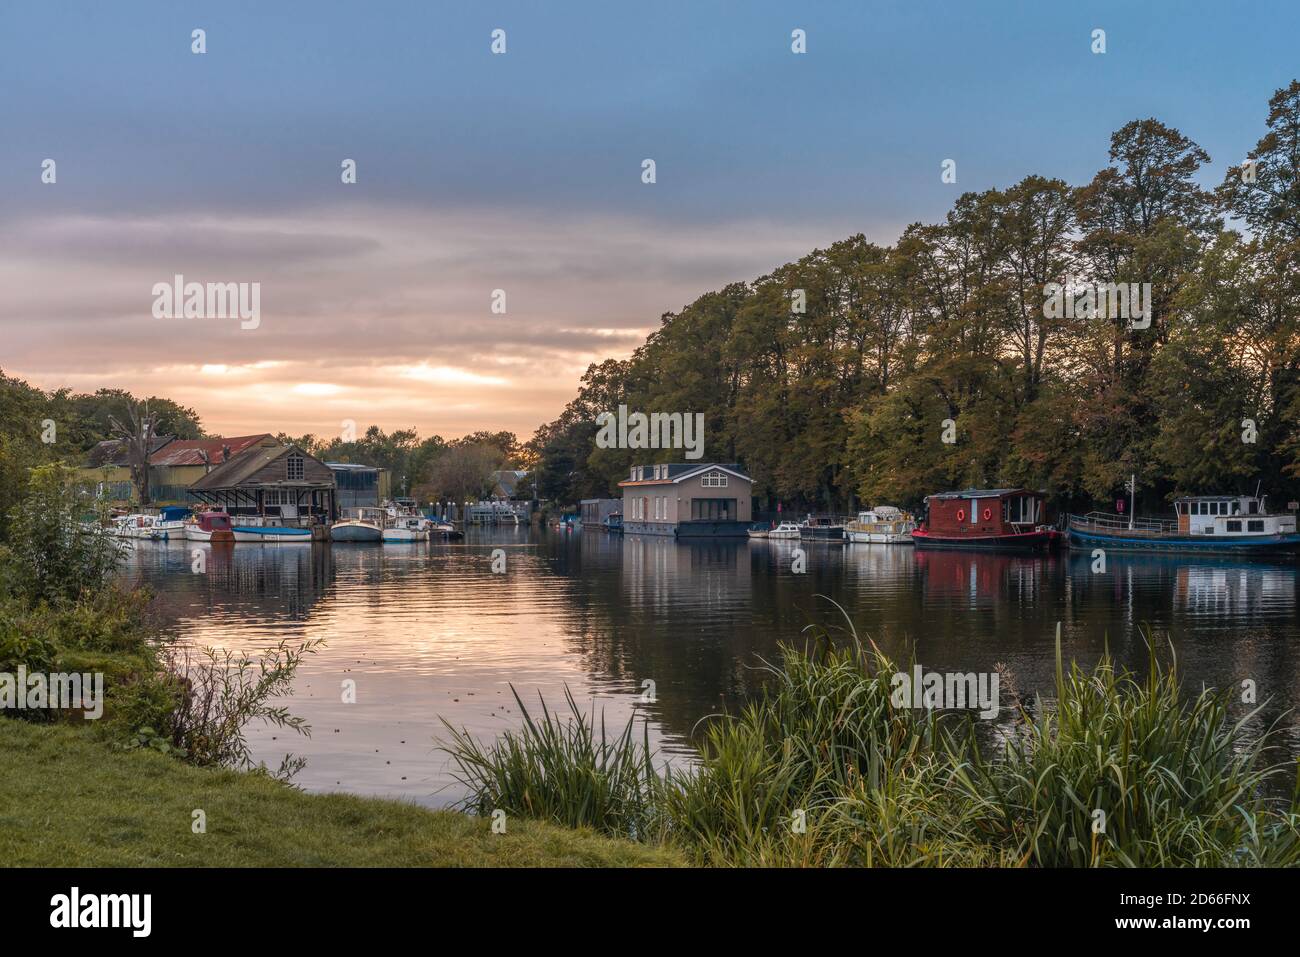 Sunset view across the Thames to boats and houseboats moored at Platt's Eyot island in Hampton West London during autumn 2020, London, England, UK Stock Photo